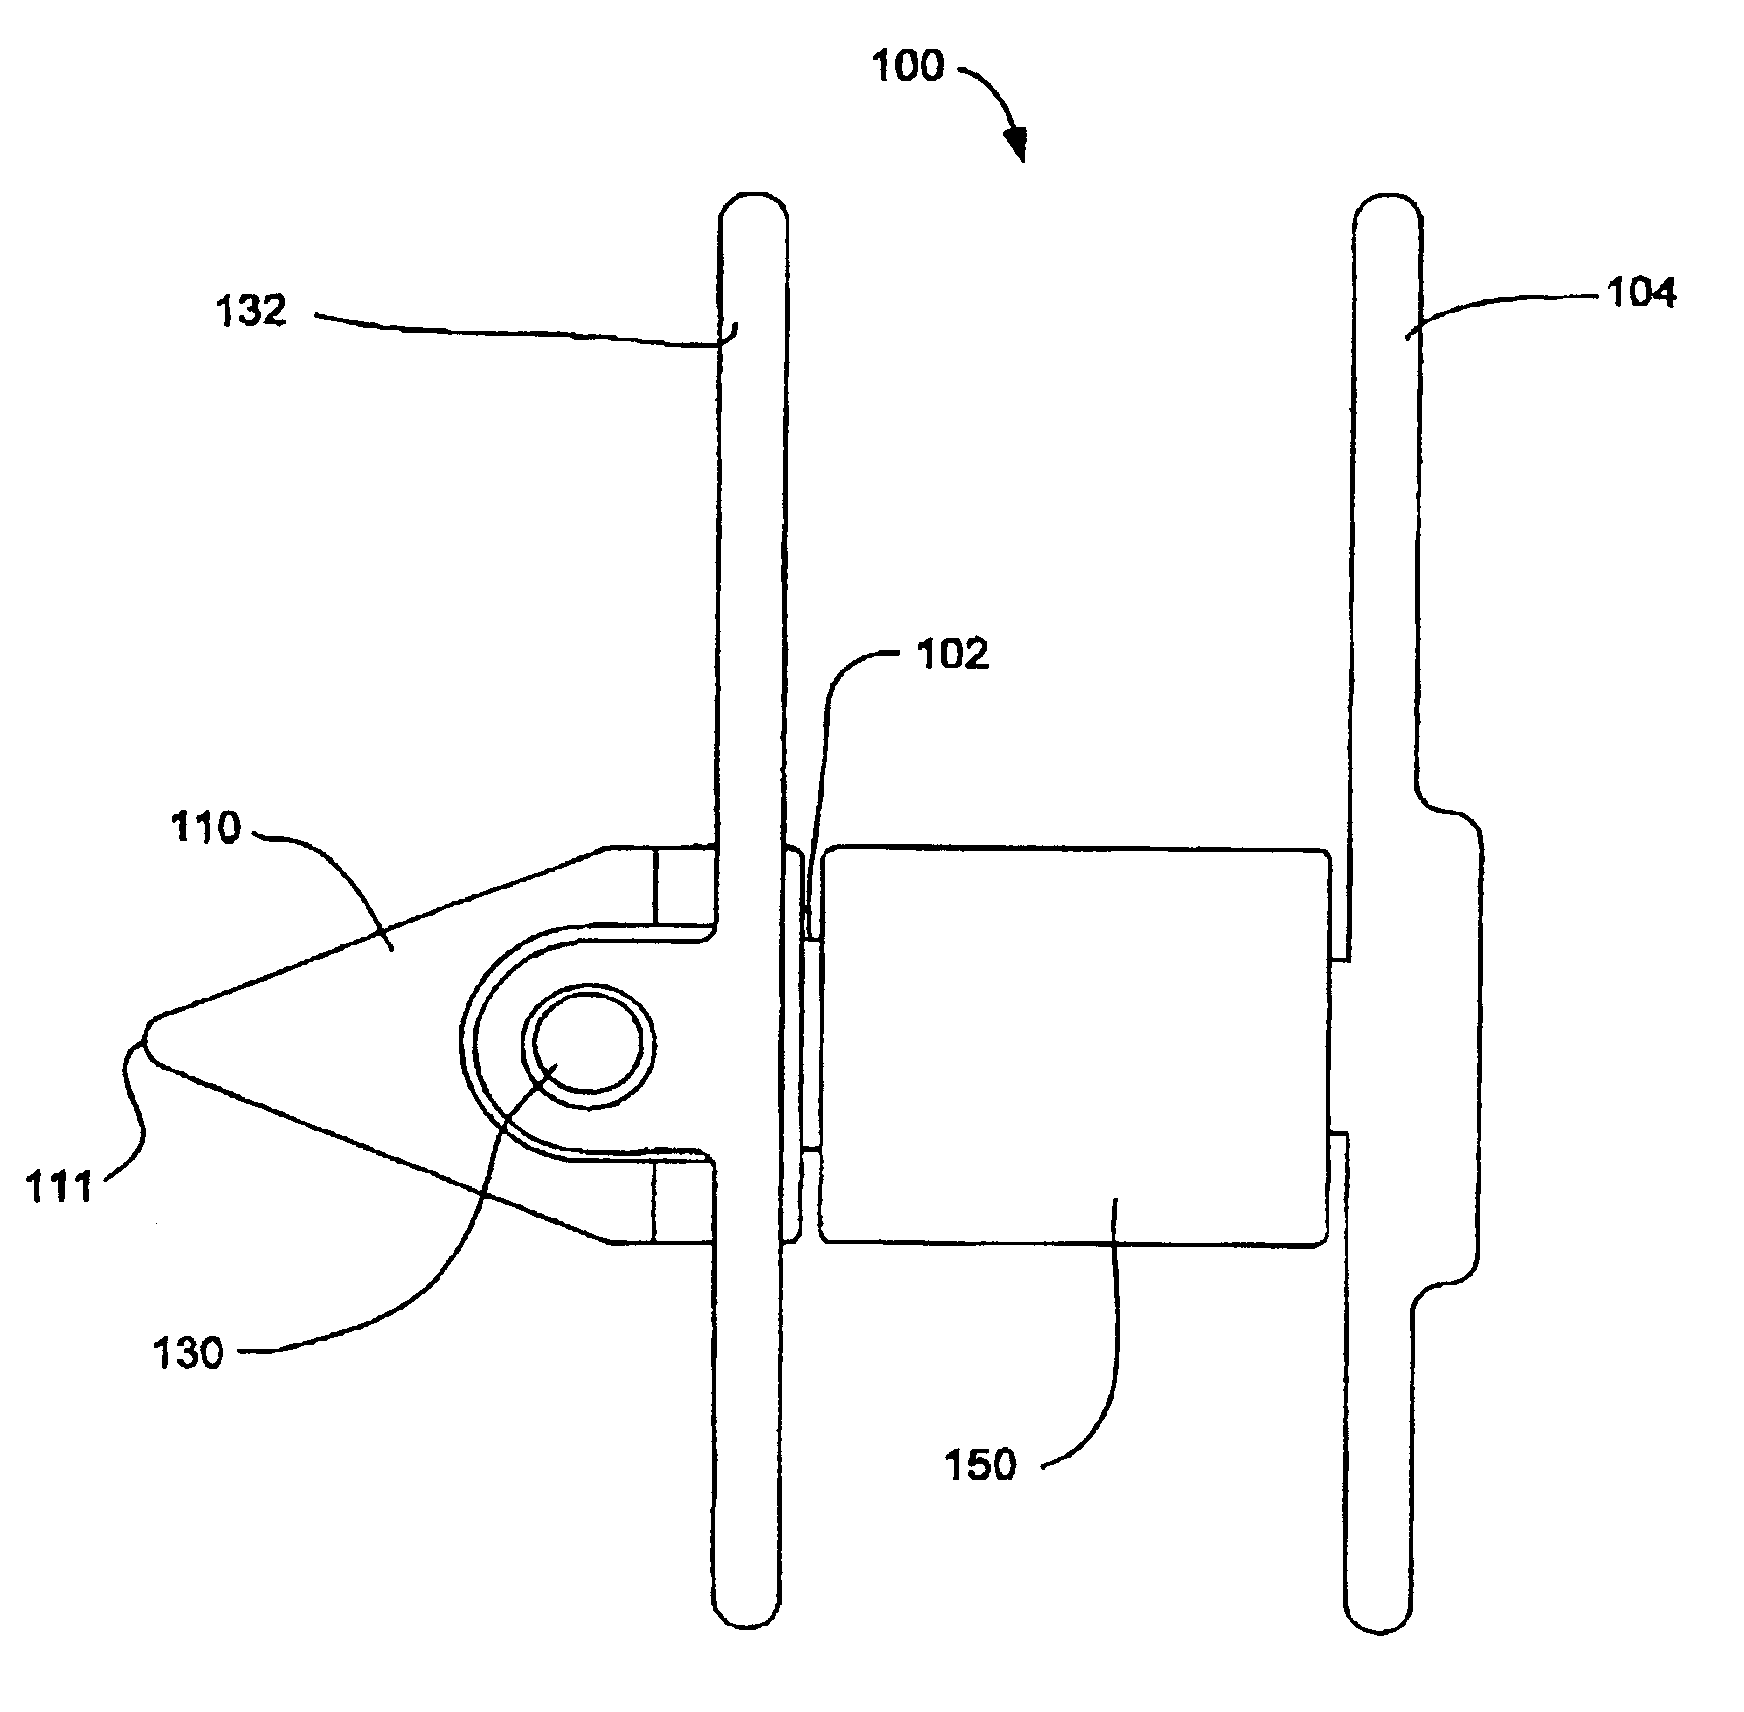 Deflectable spacer for use as an interspinous process implant and method